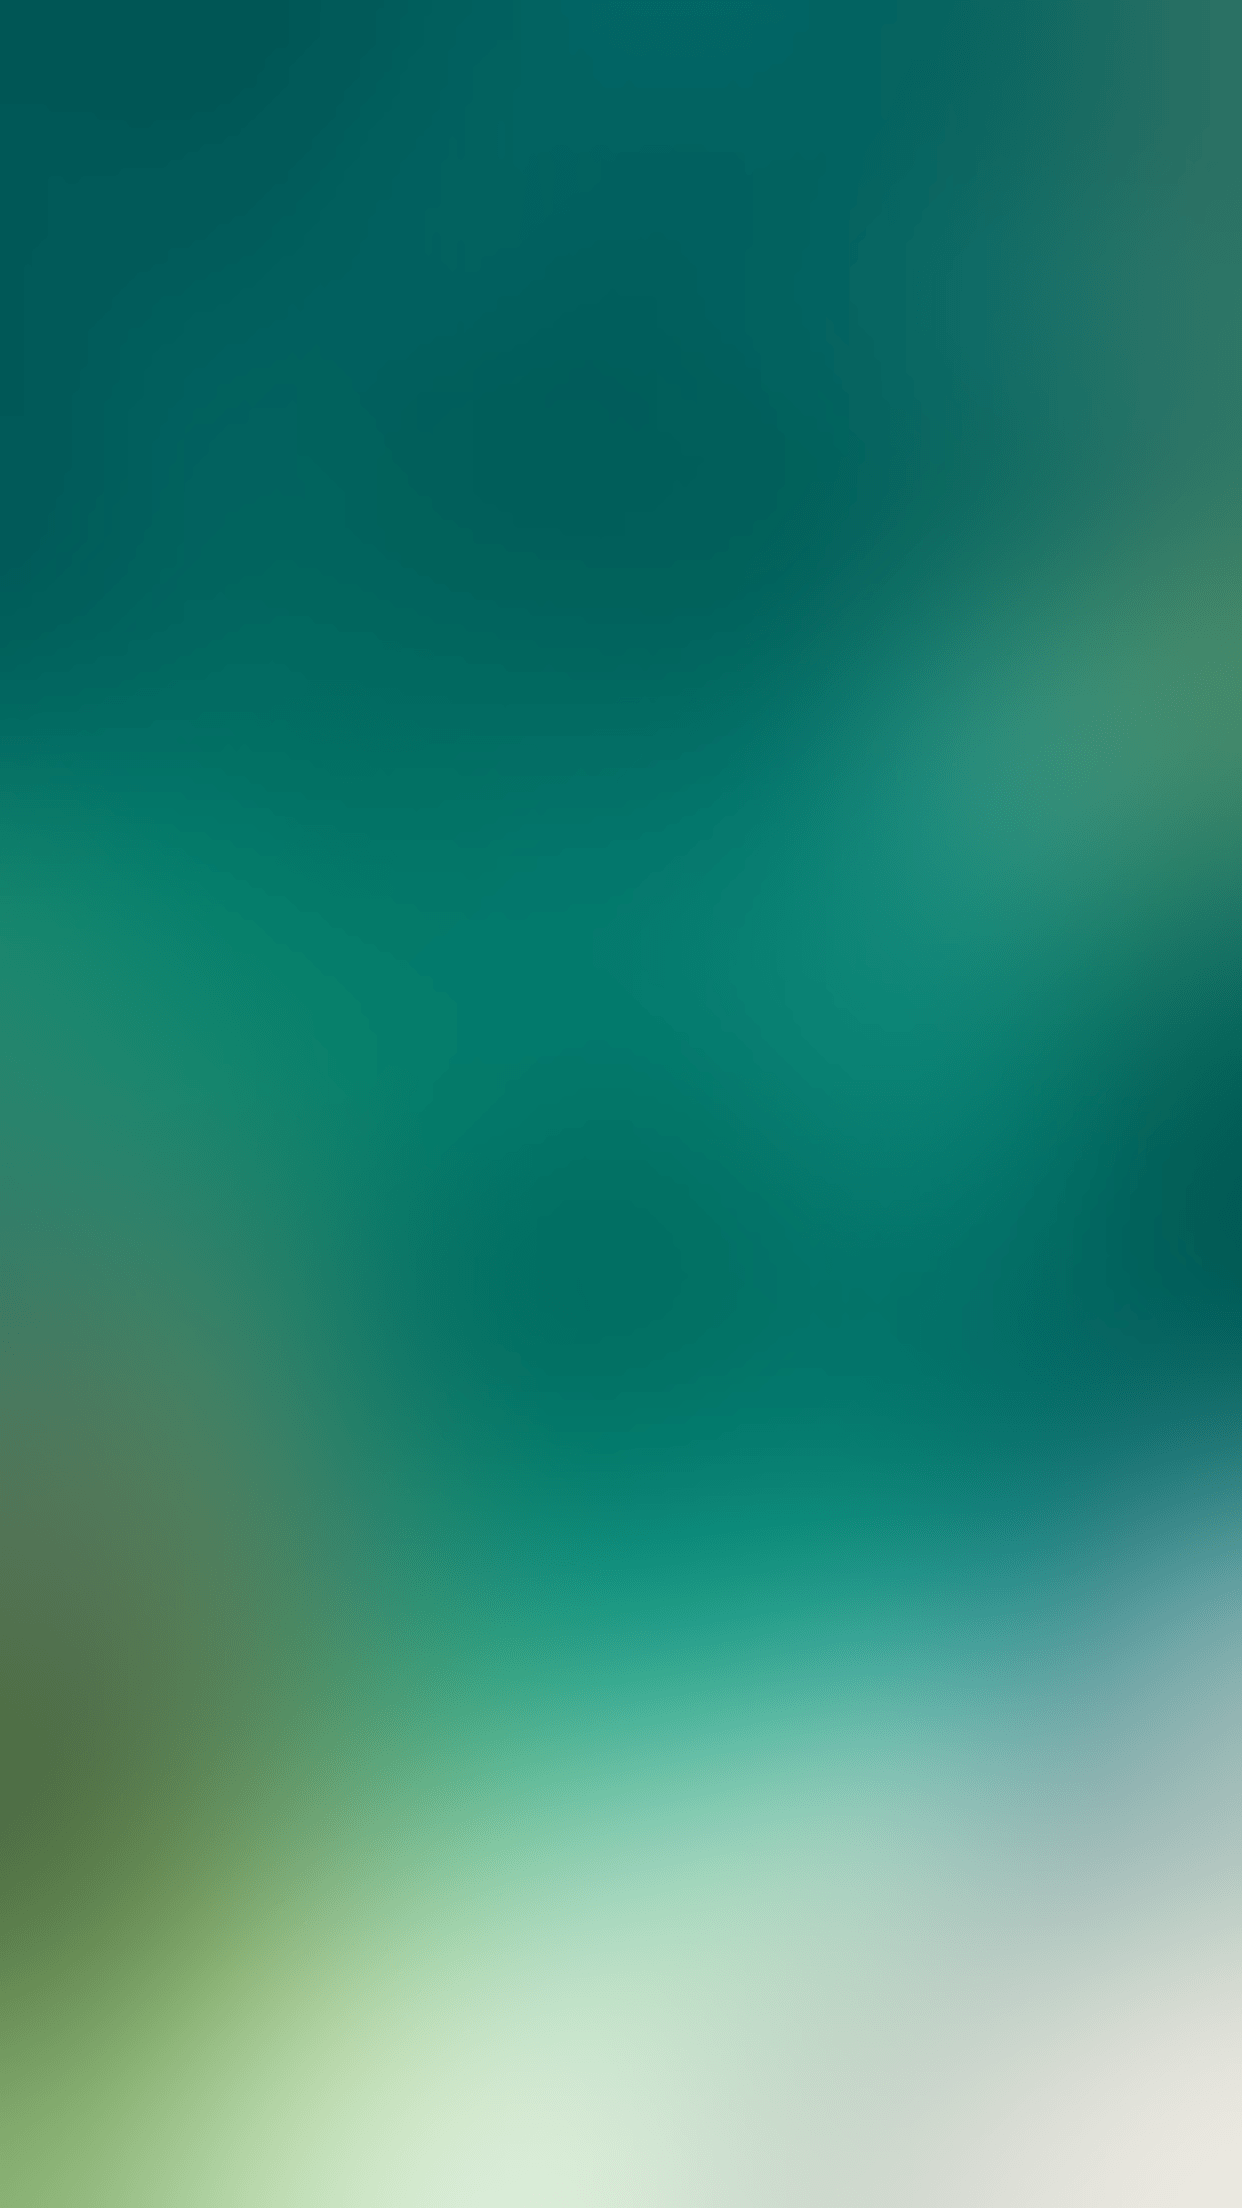 Ios 10 Wallpapers Wallpaper Cave